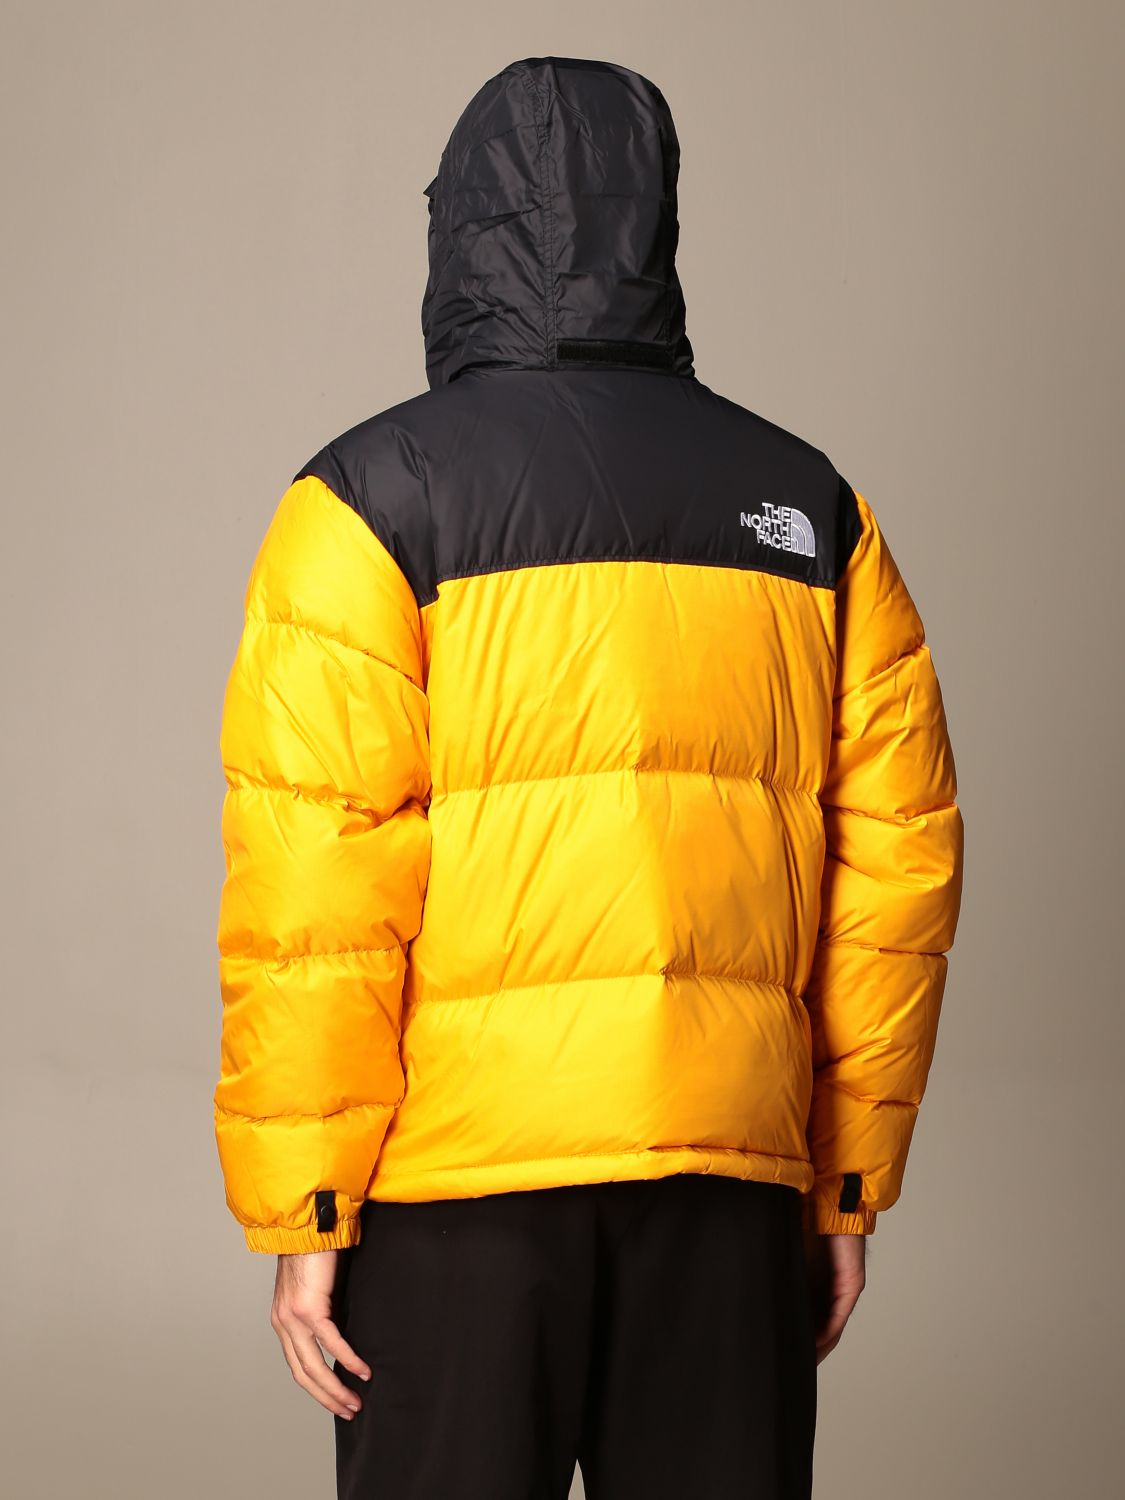 THE NORTH FACE: Nuptse down jacket with logo | Jacket The North Face ...